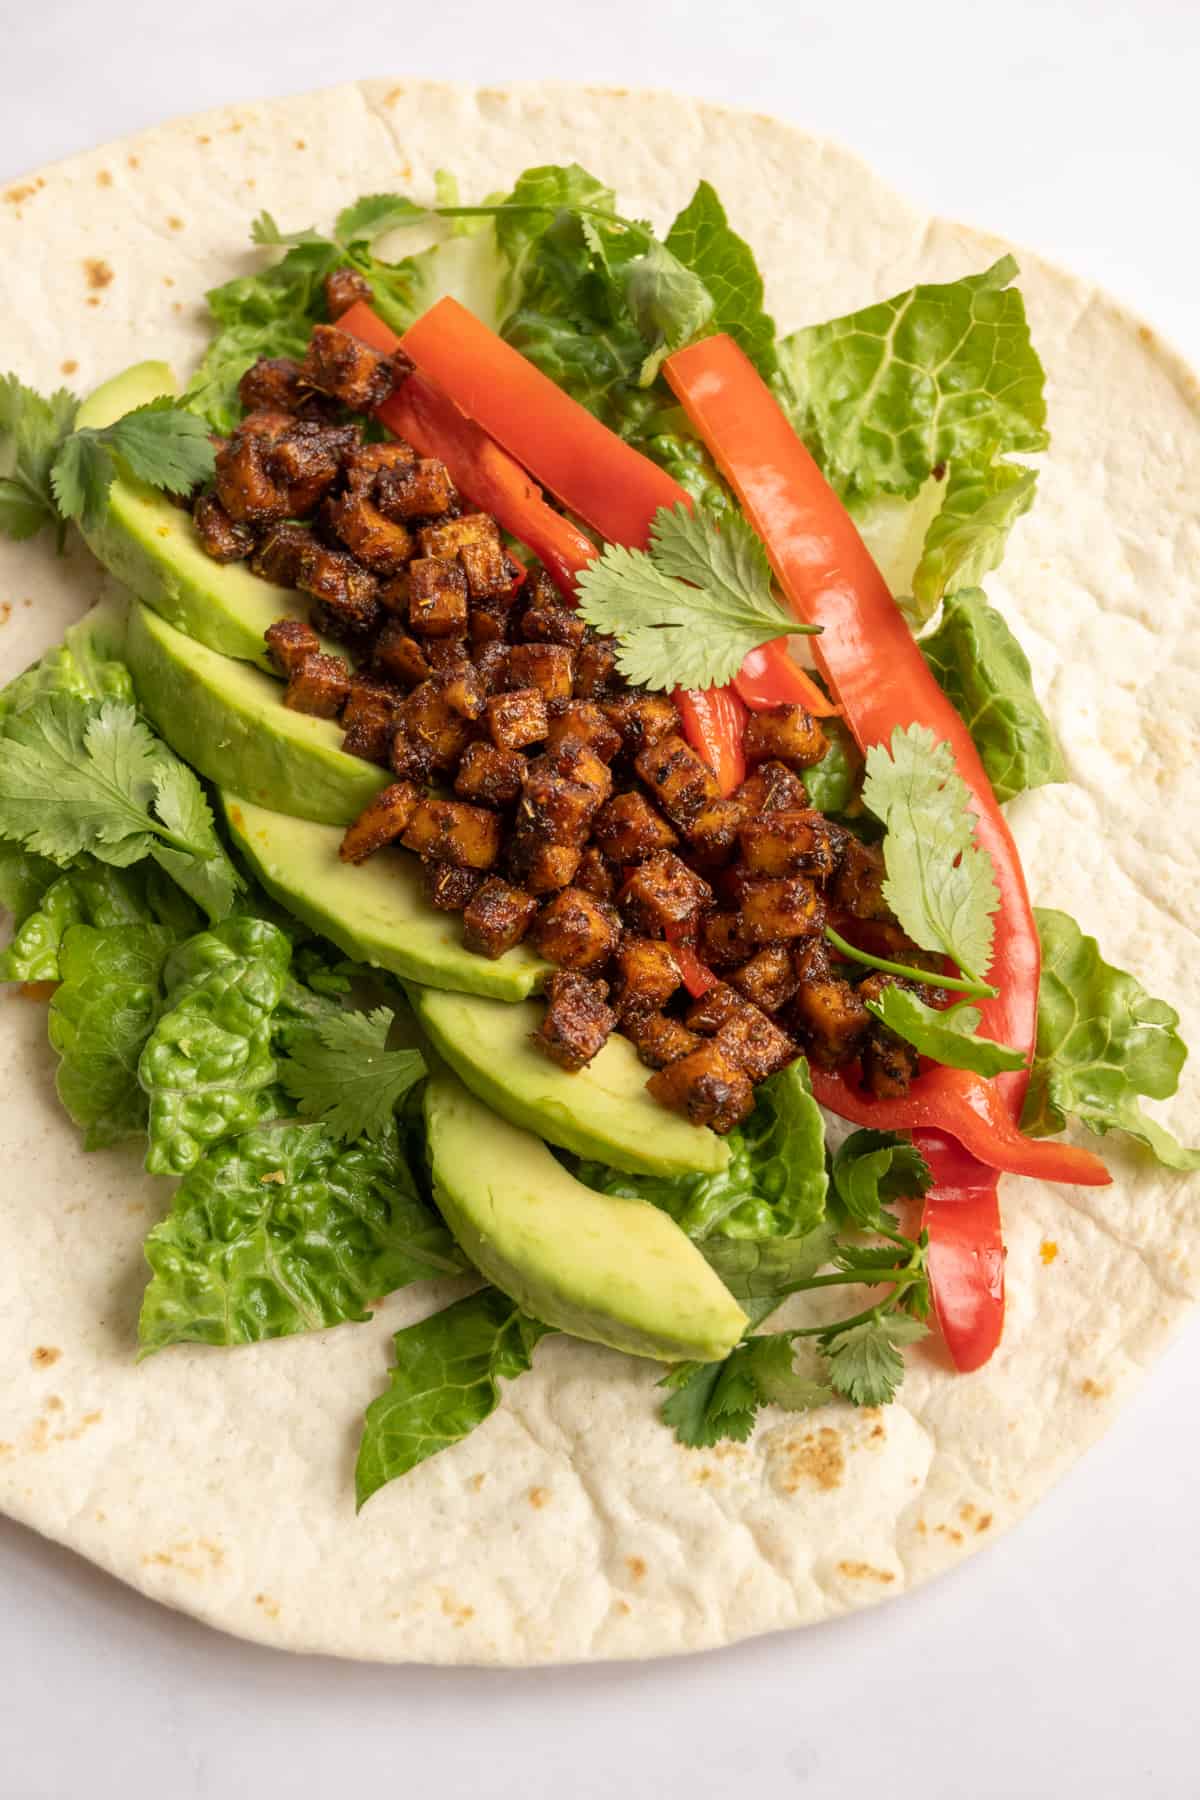 The fillings for a tofu wrap are assembled on a tortilla: shredded lettuce, avocado, red pepper, spicy tofu cubes and fresh cilantro.